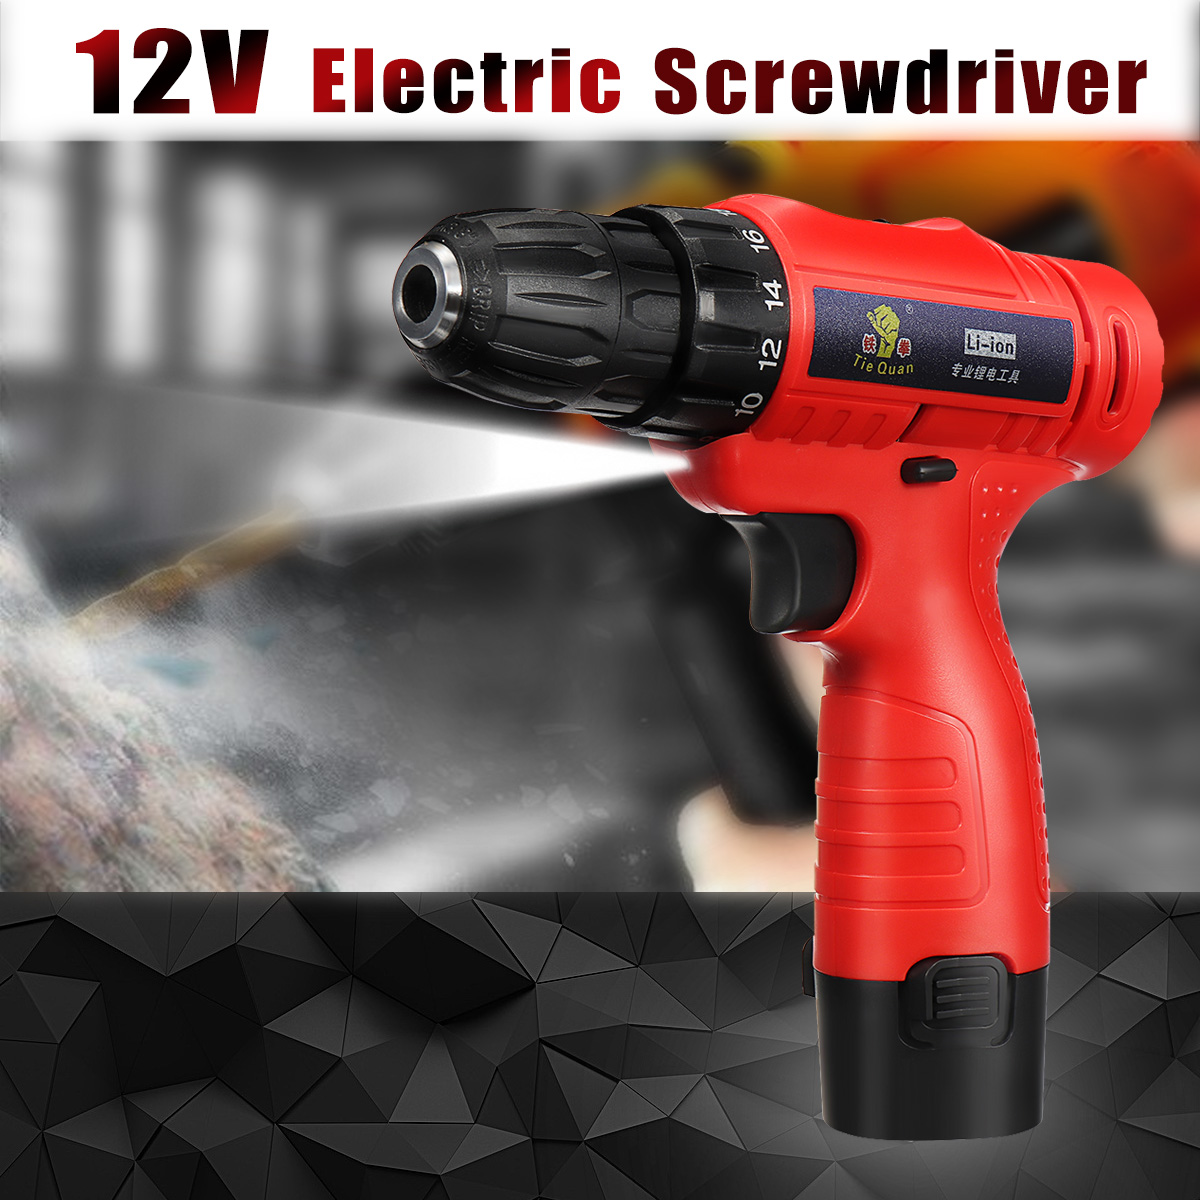 110V-240V-Cordless-Electric-Screwdriver-1-Battery-1-Charger-Drilling-Punching-Power-Tools-1287724-1